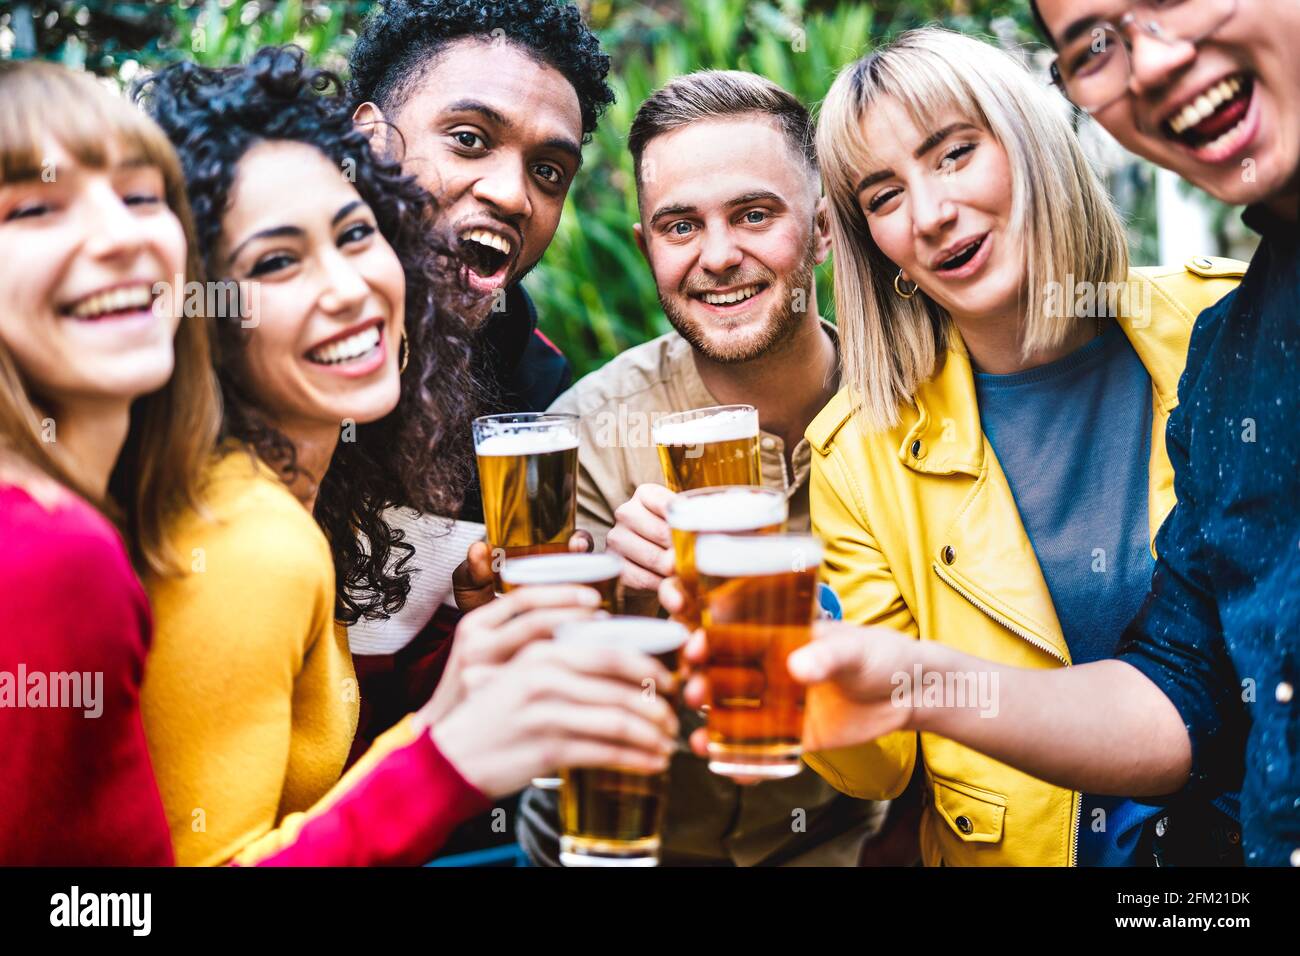 Happy friends toasting beer at brewery bar dehor - Friendship life style concept with young millennial people enjoying time together at open air pub Stock Photo